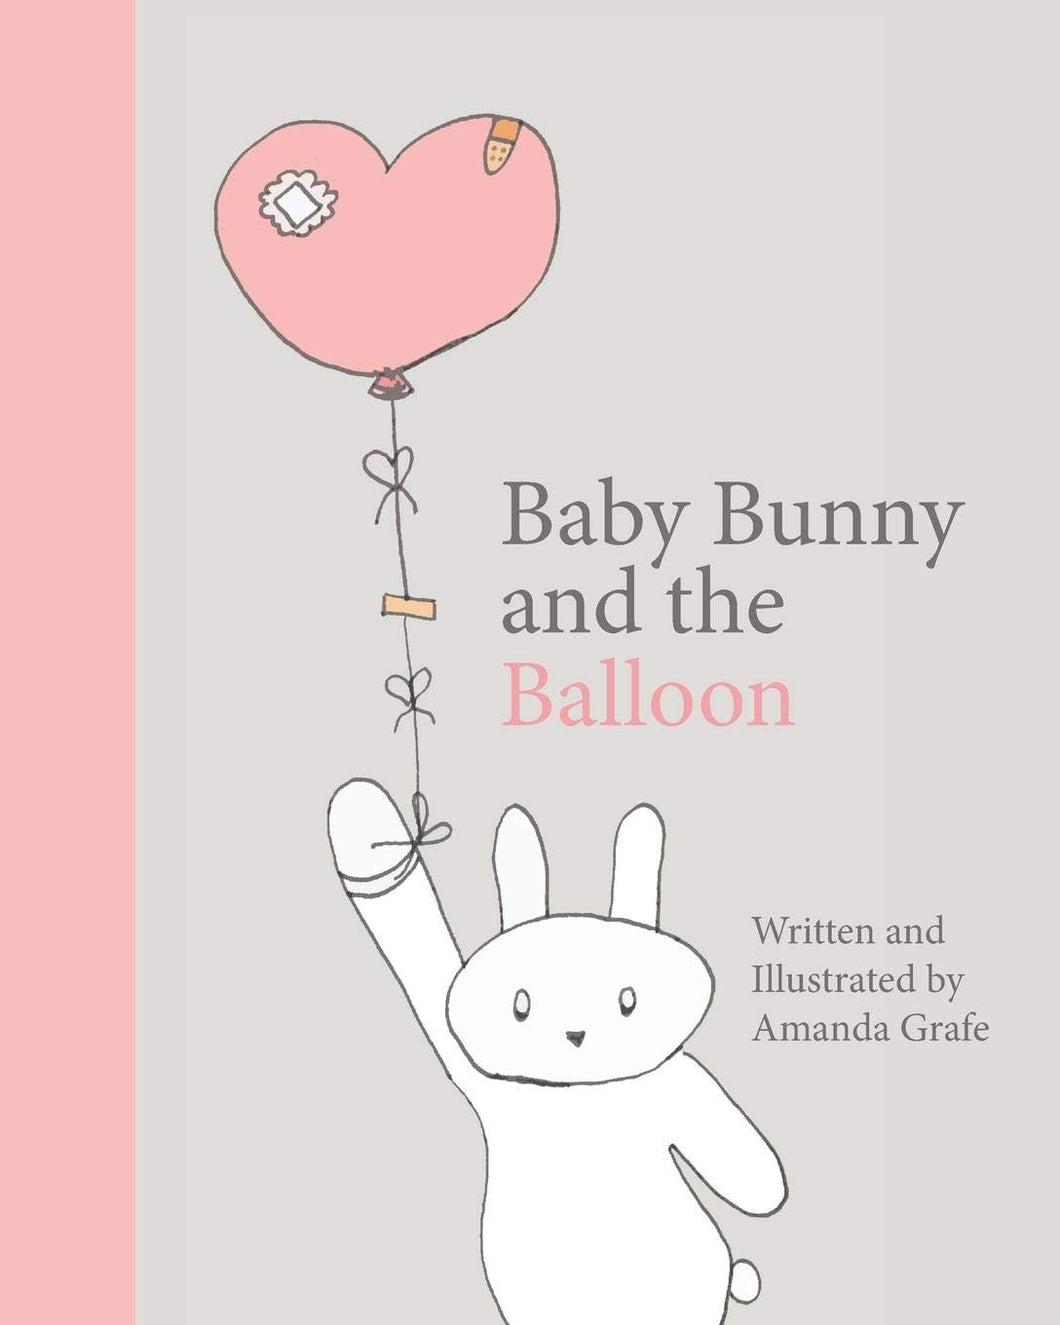 Baby Bunny and the Balloon